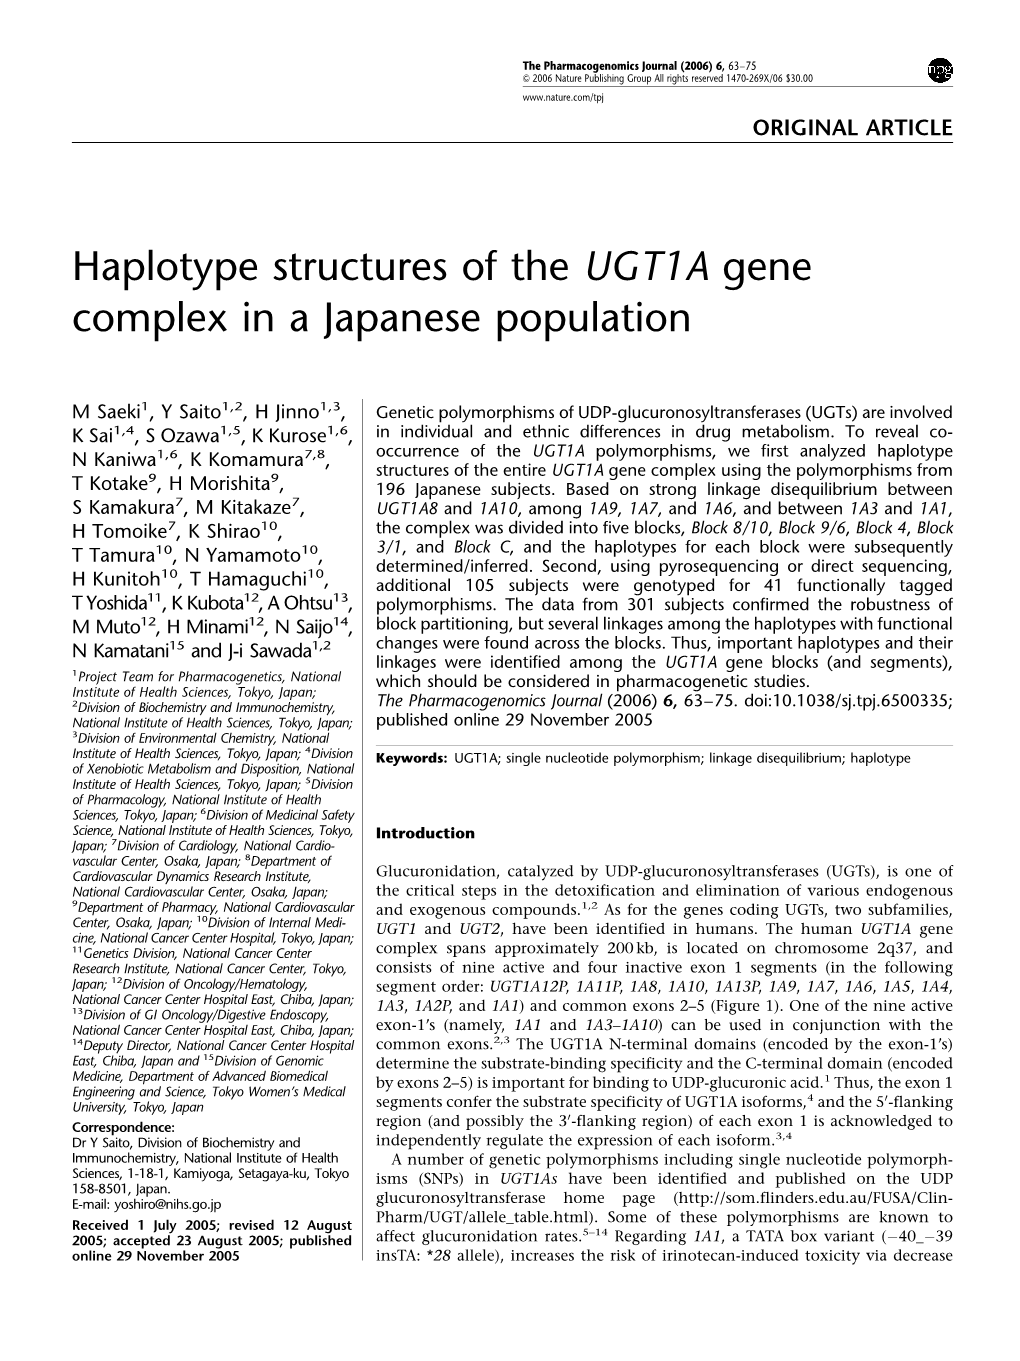 Haplotype Structures of the UGT1A Gene Complex in a Japanese Population